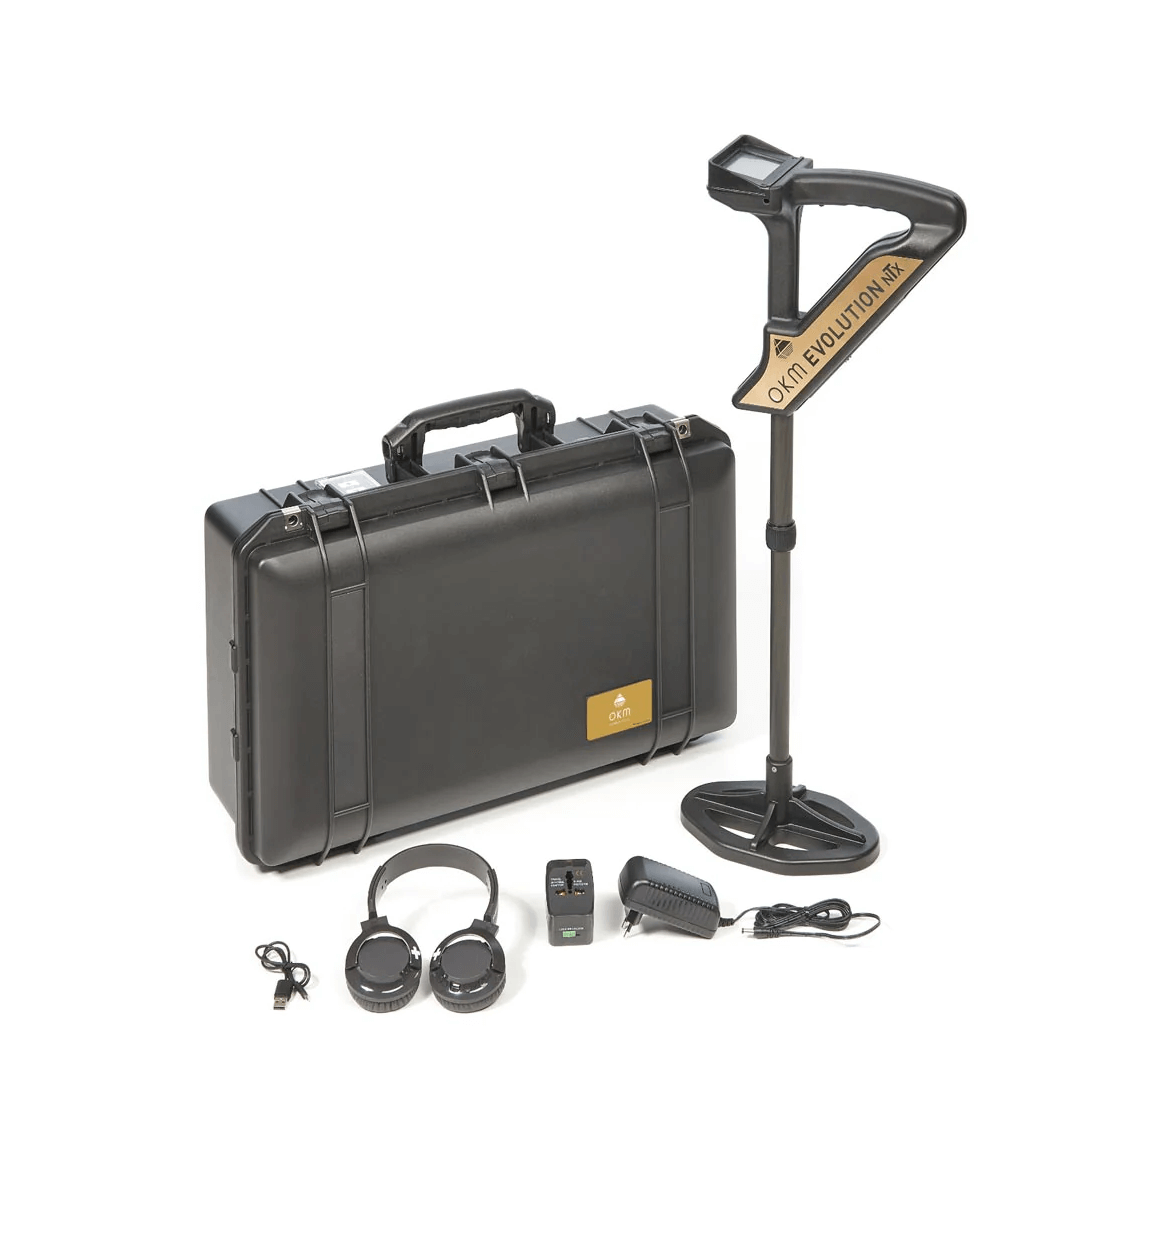 A briefcase containing the OKM Evolution NTX metal detector, on a white background